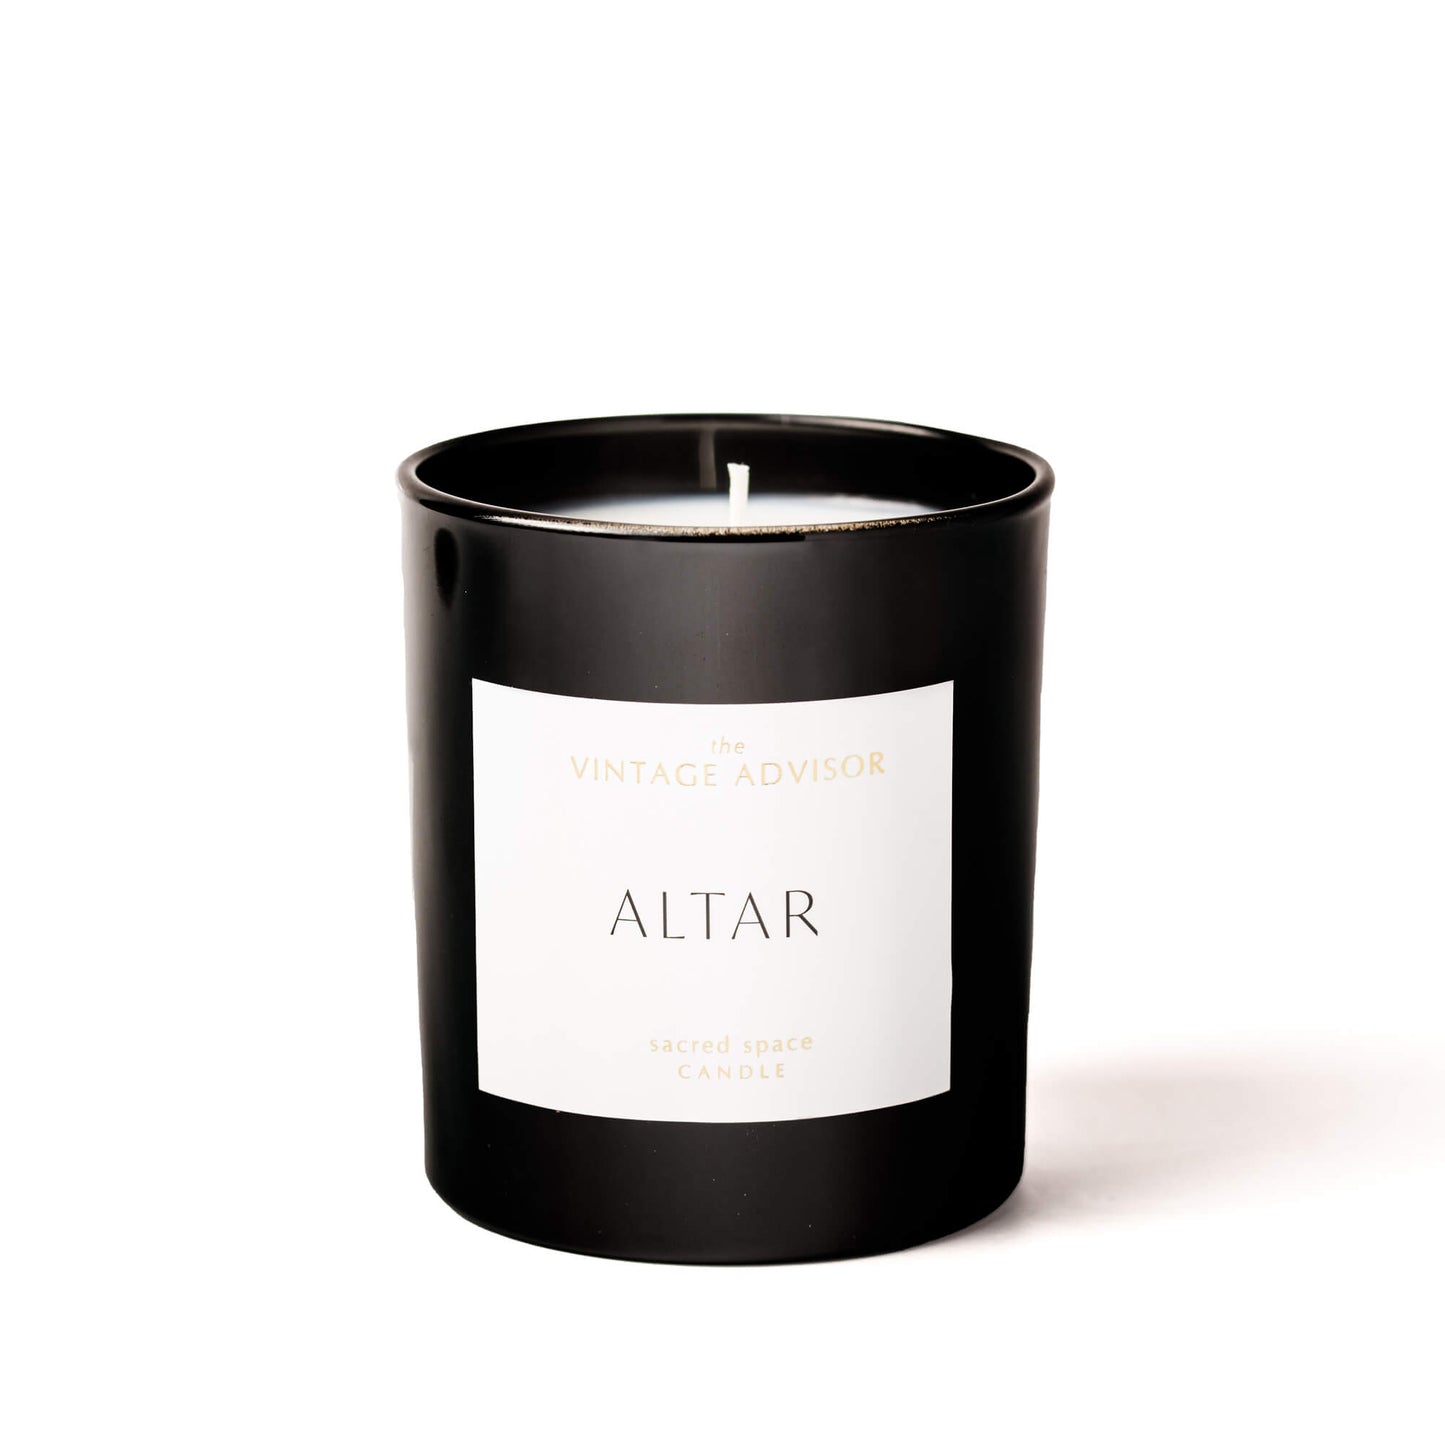 Altar  non-toxic luxurious candle by the vintage advisor